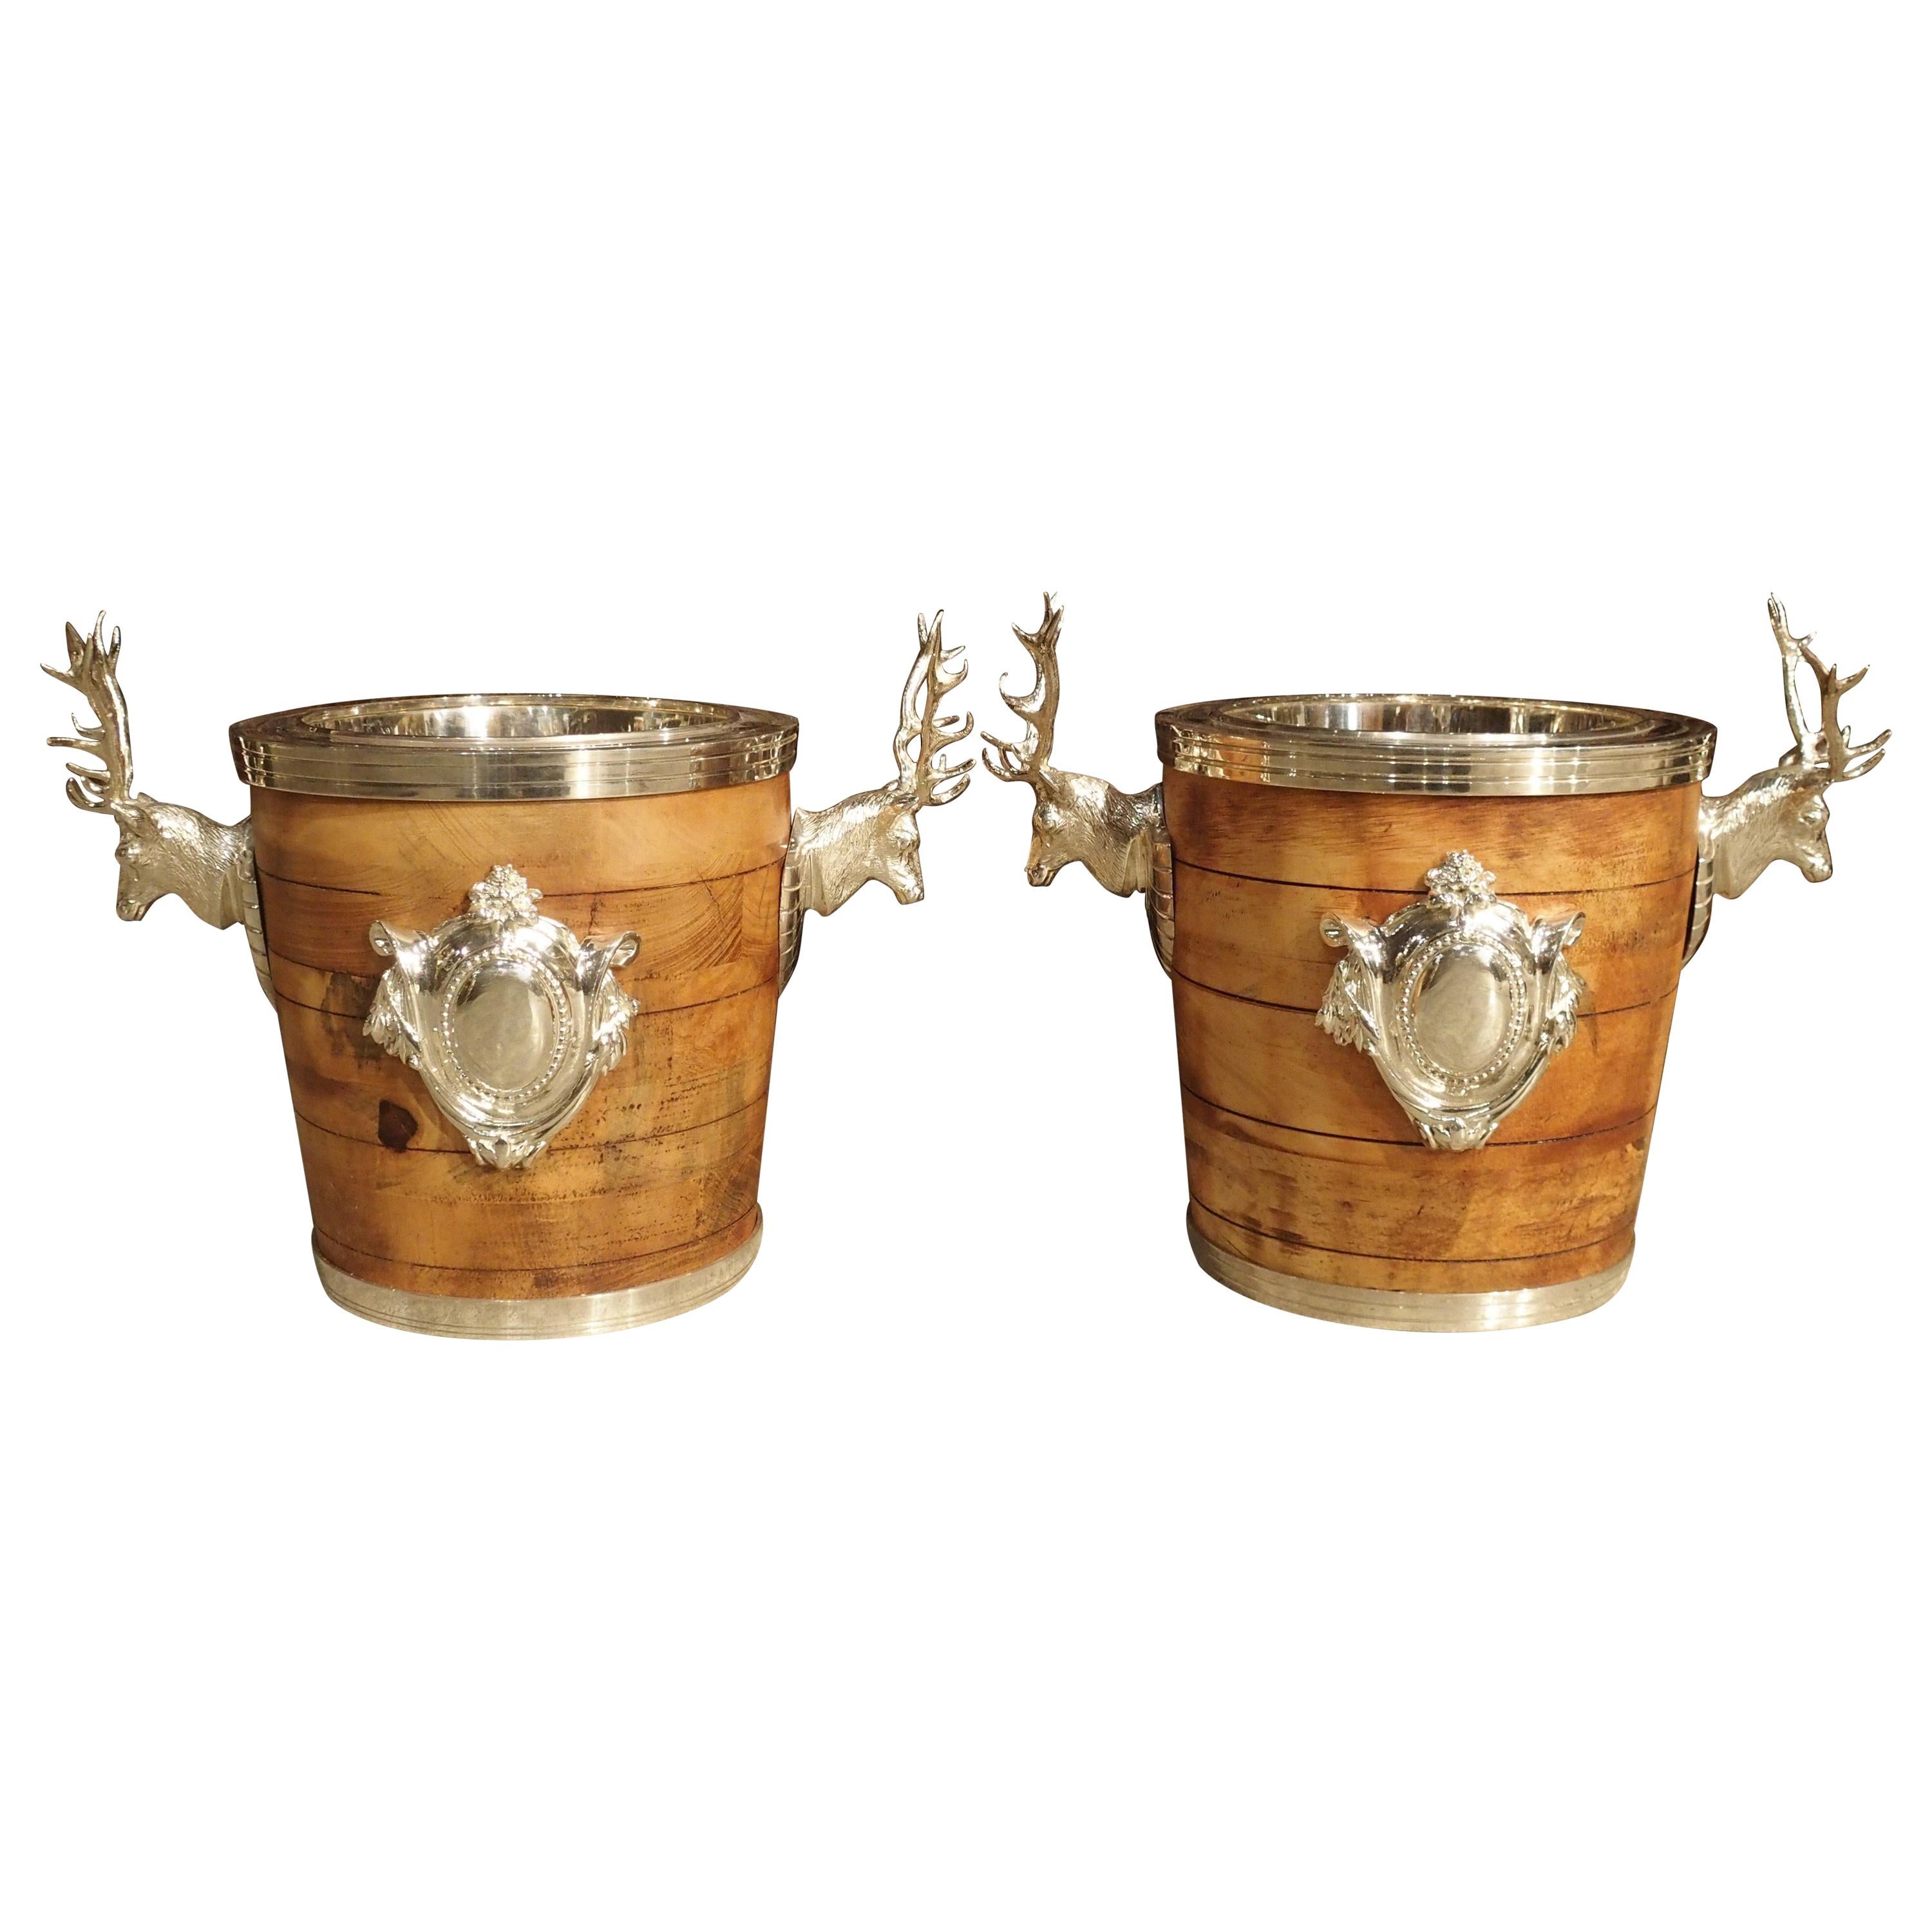 Pair of Silverplate and Wood Wine Coolers with Mounted Stags and Cartouches